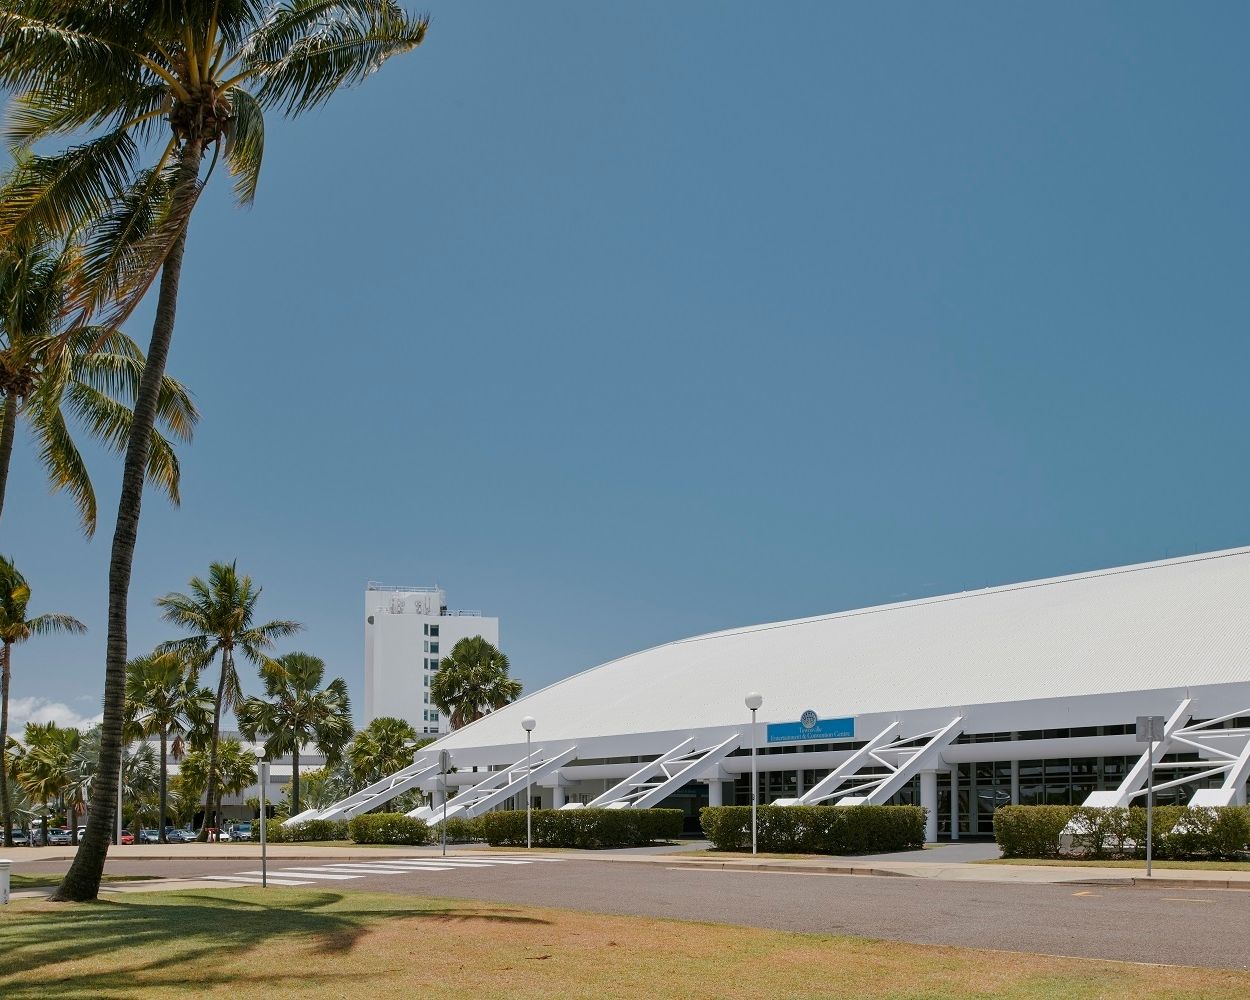 Townsville Entertainment and Convention Centre